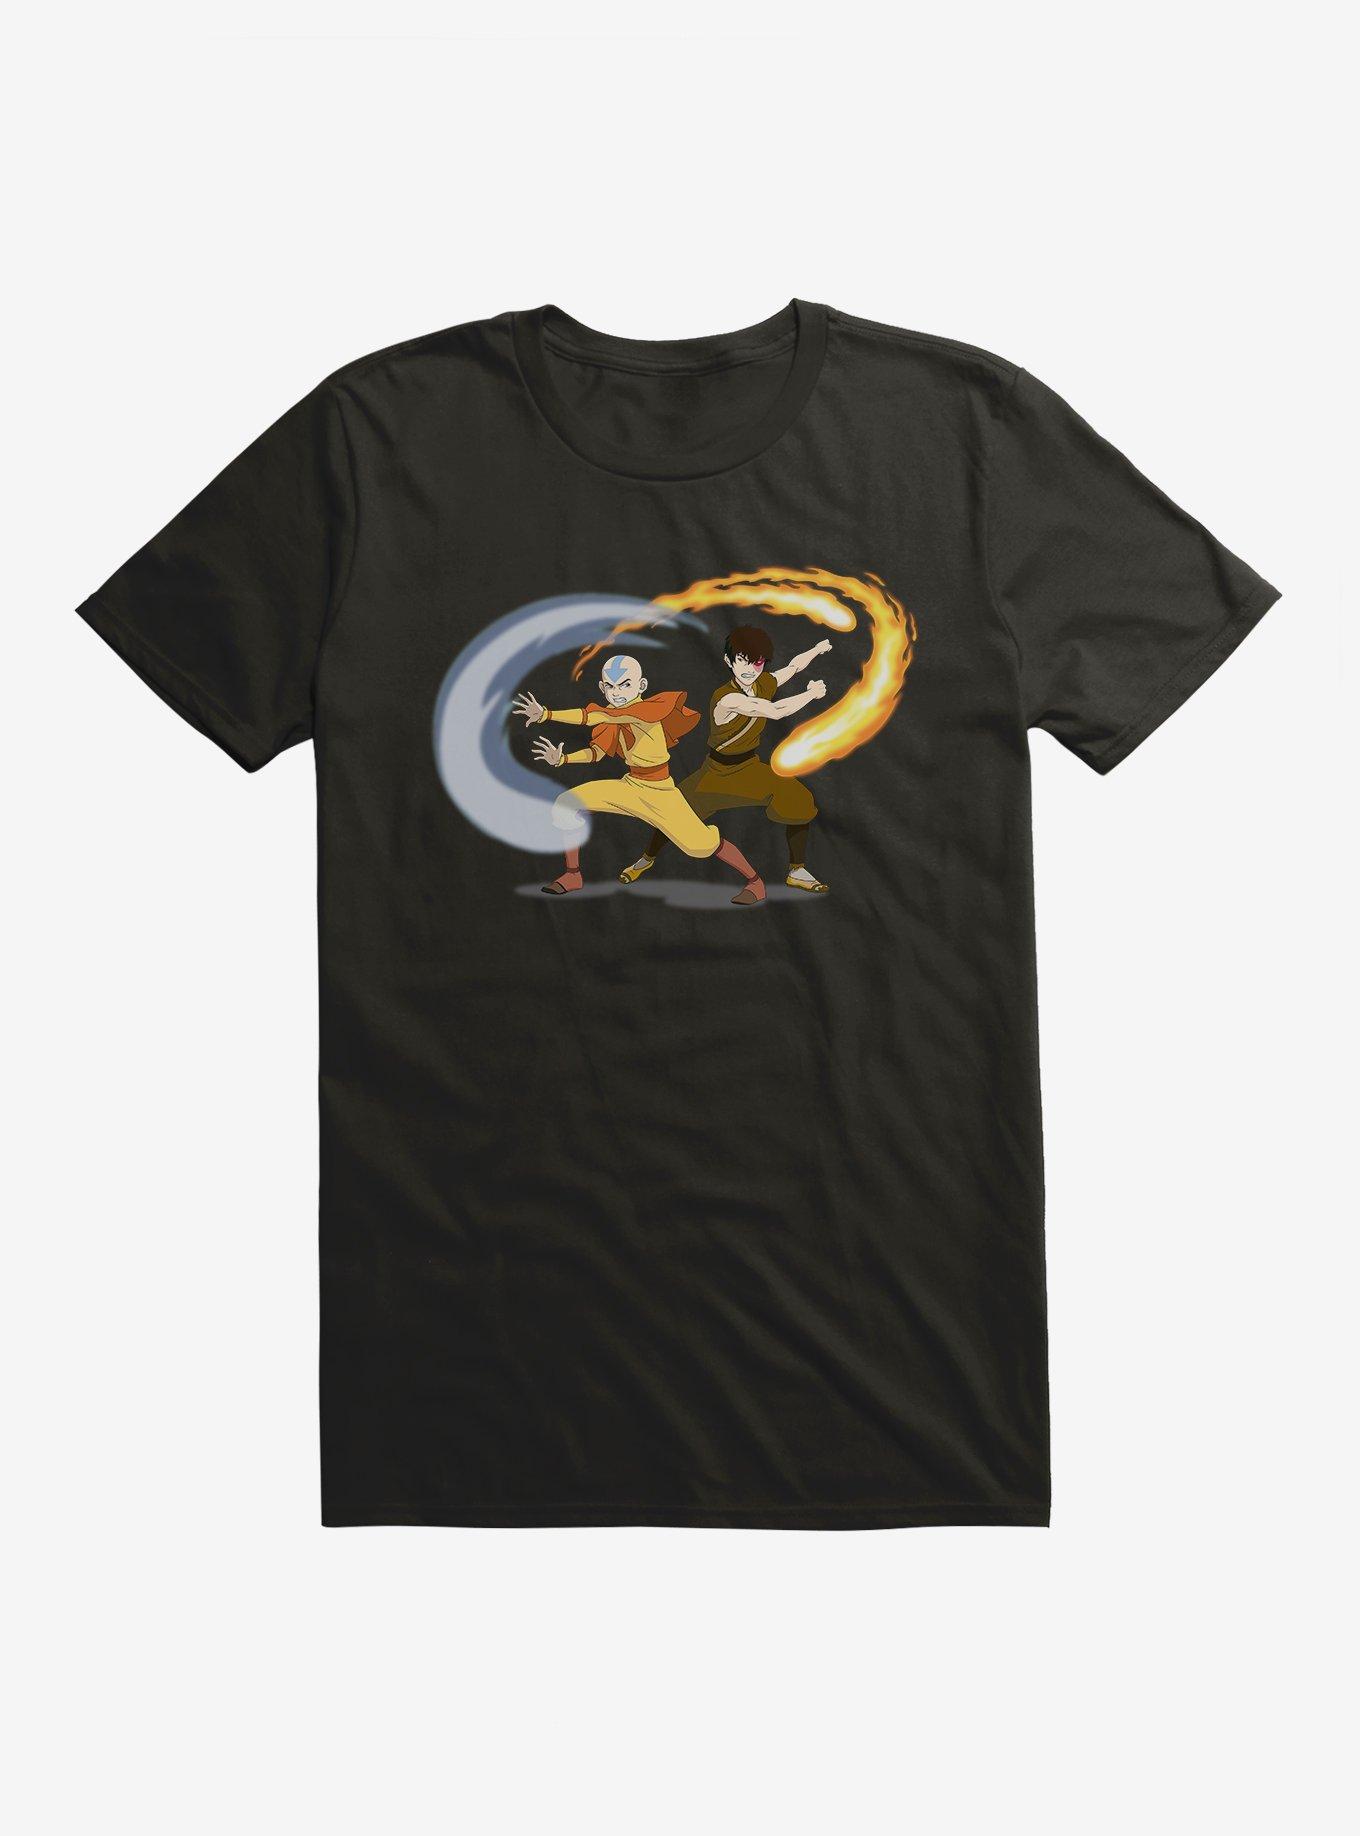 Avatar: The Last Airbender Aang And Zuko T-Shirt